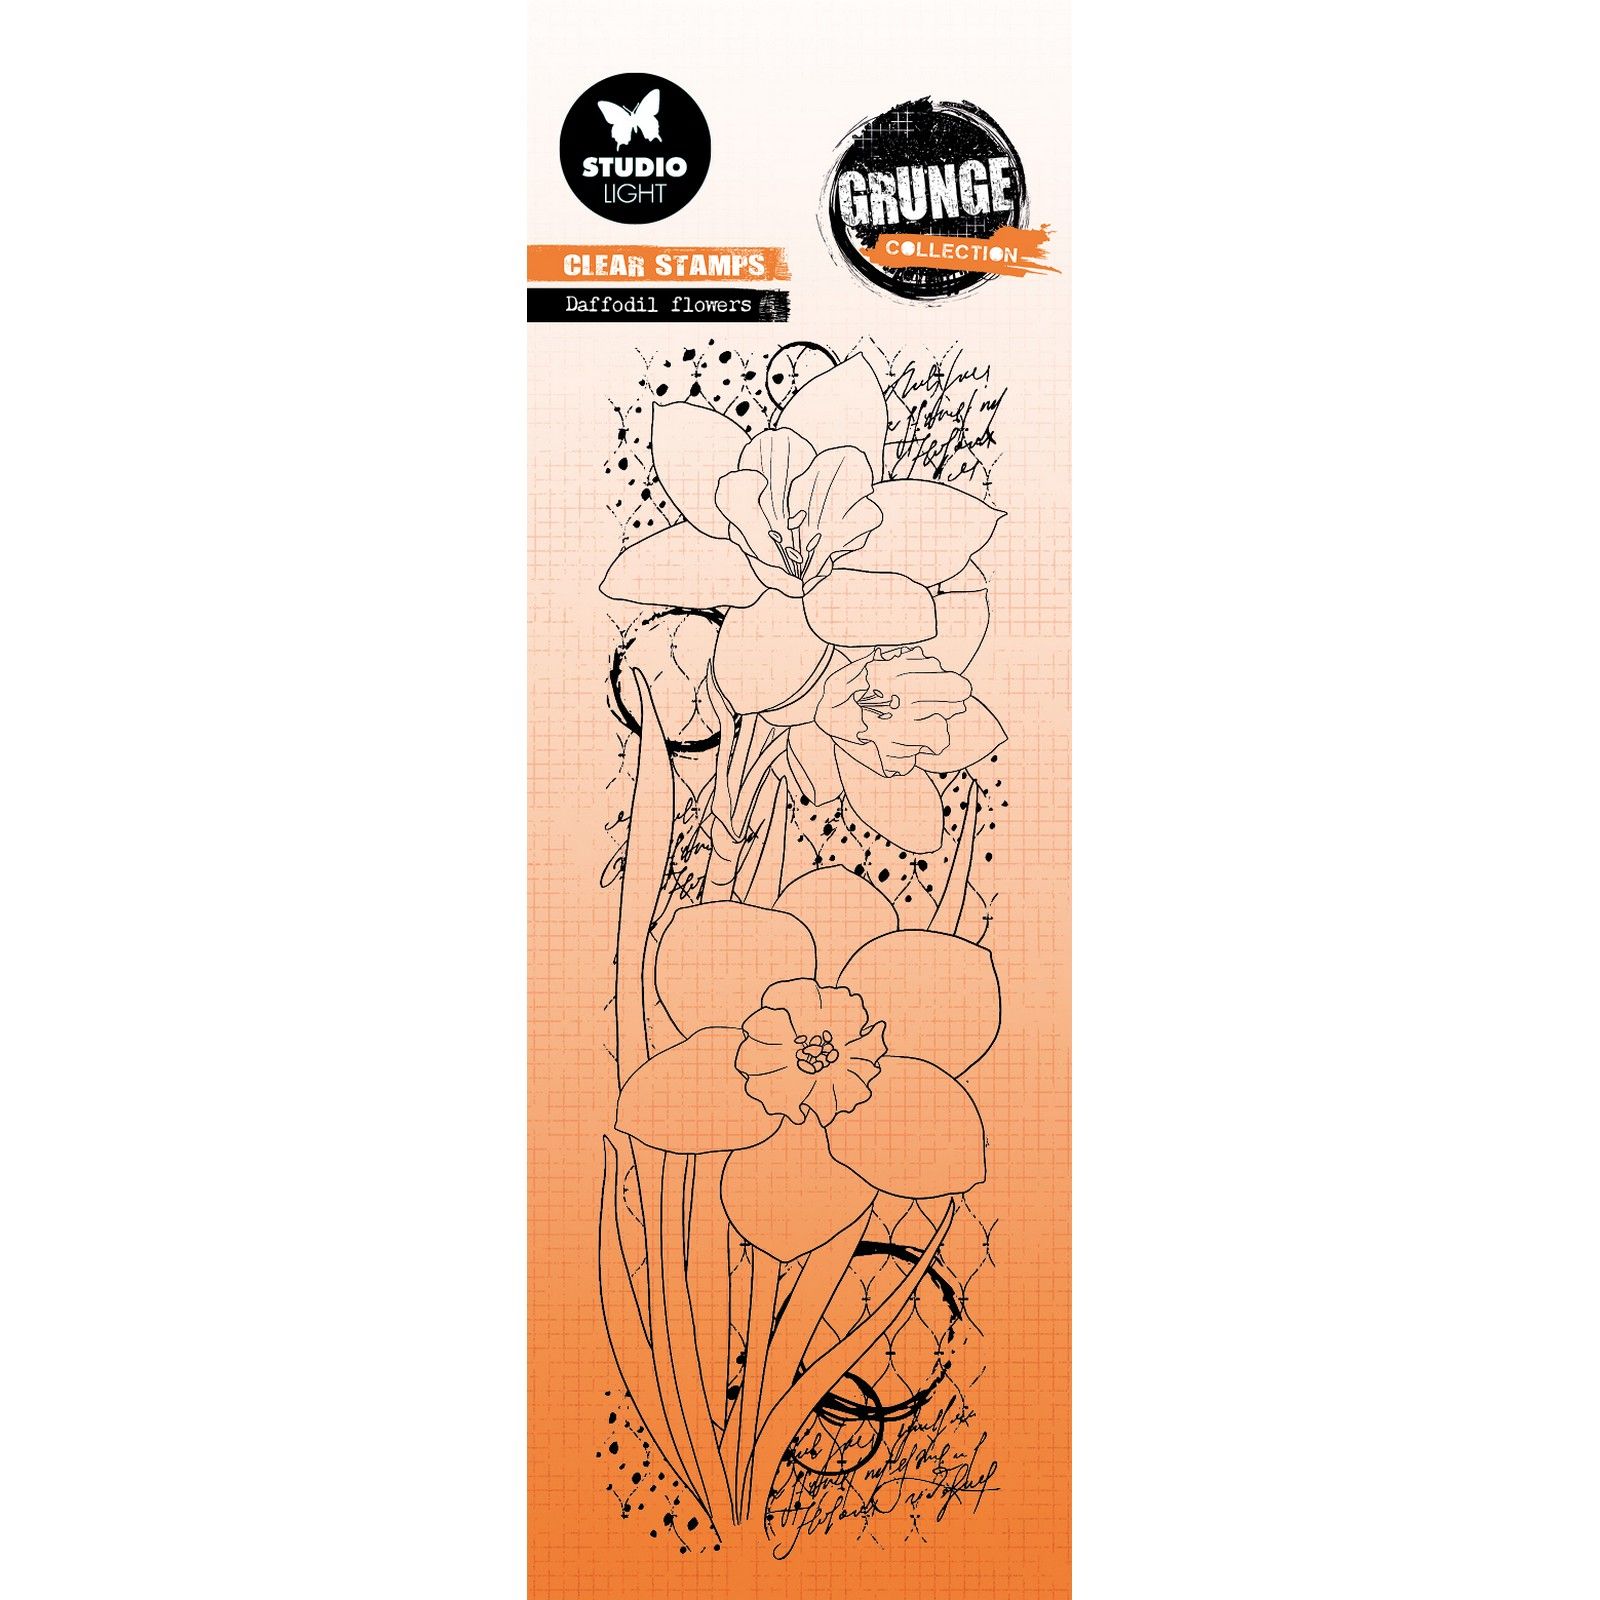 Studio Light • Grunge Collection Clear Stamp Daffodil Flowers